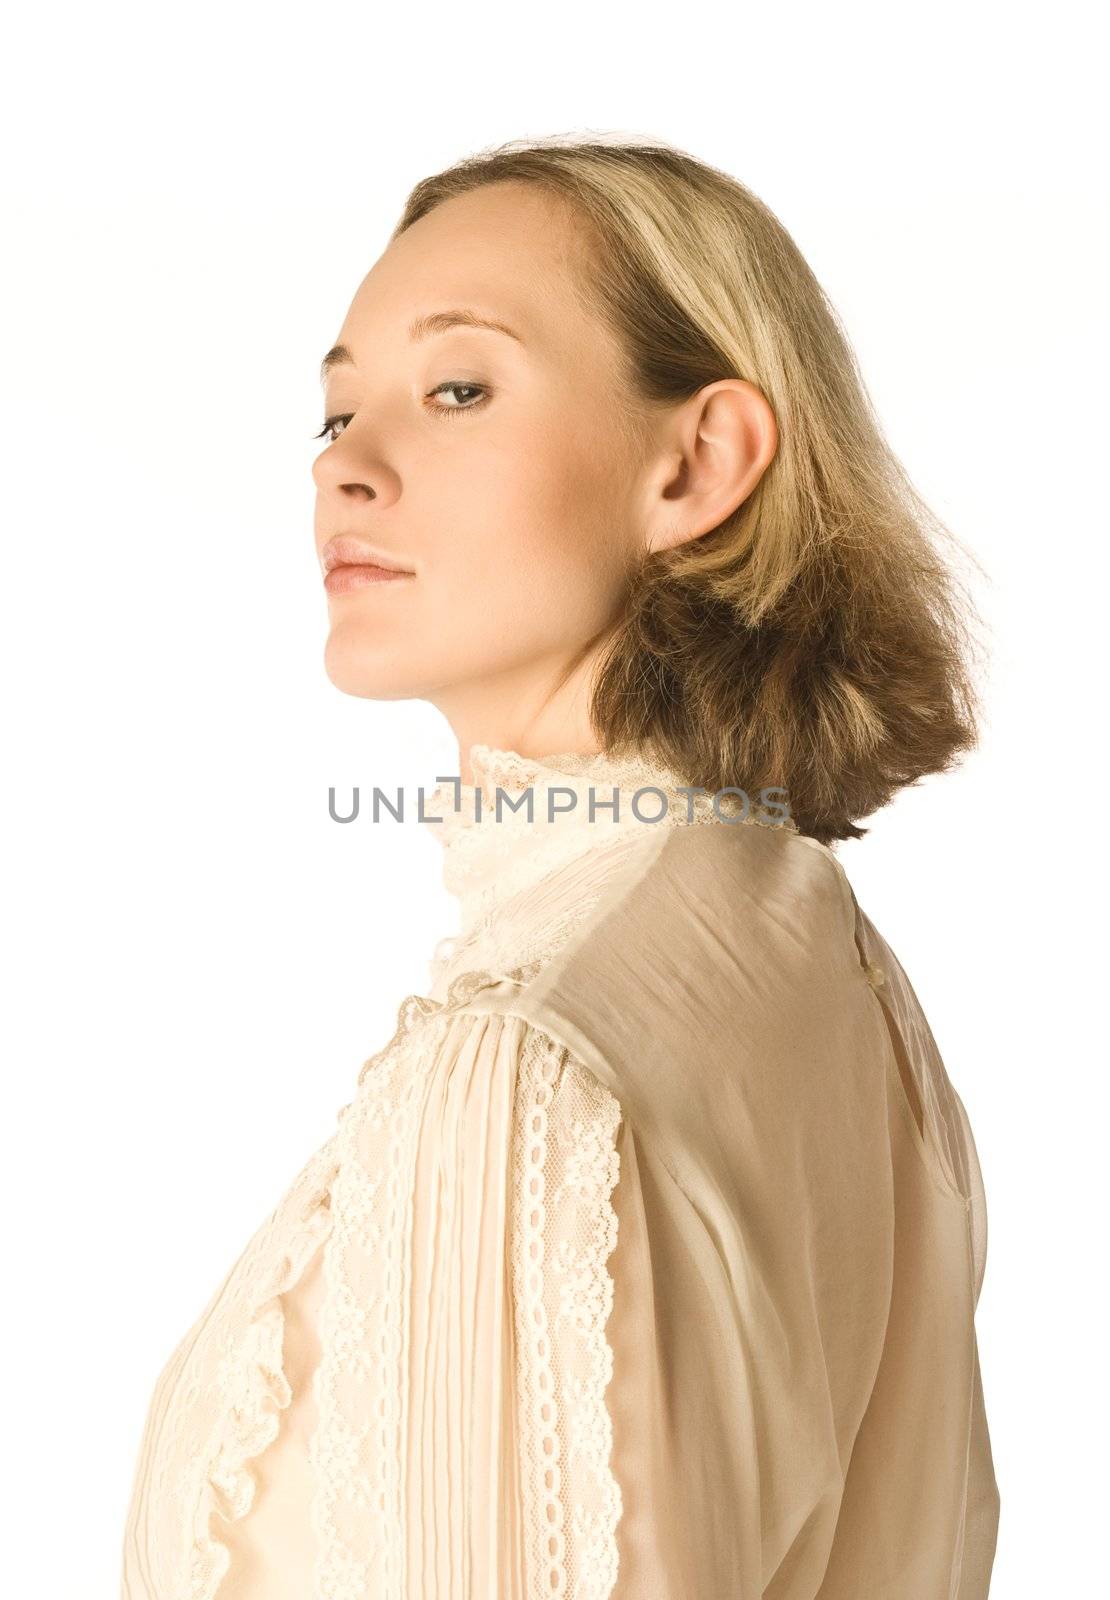 The portrait of a woman looking coldly back over her shoulder
